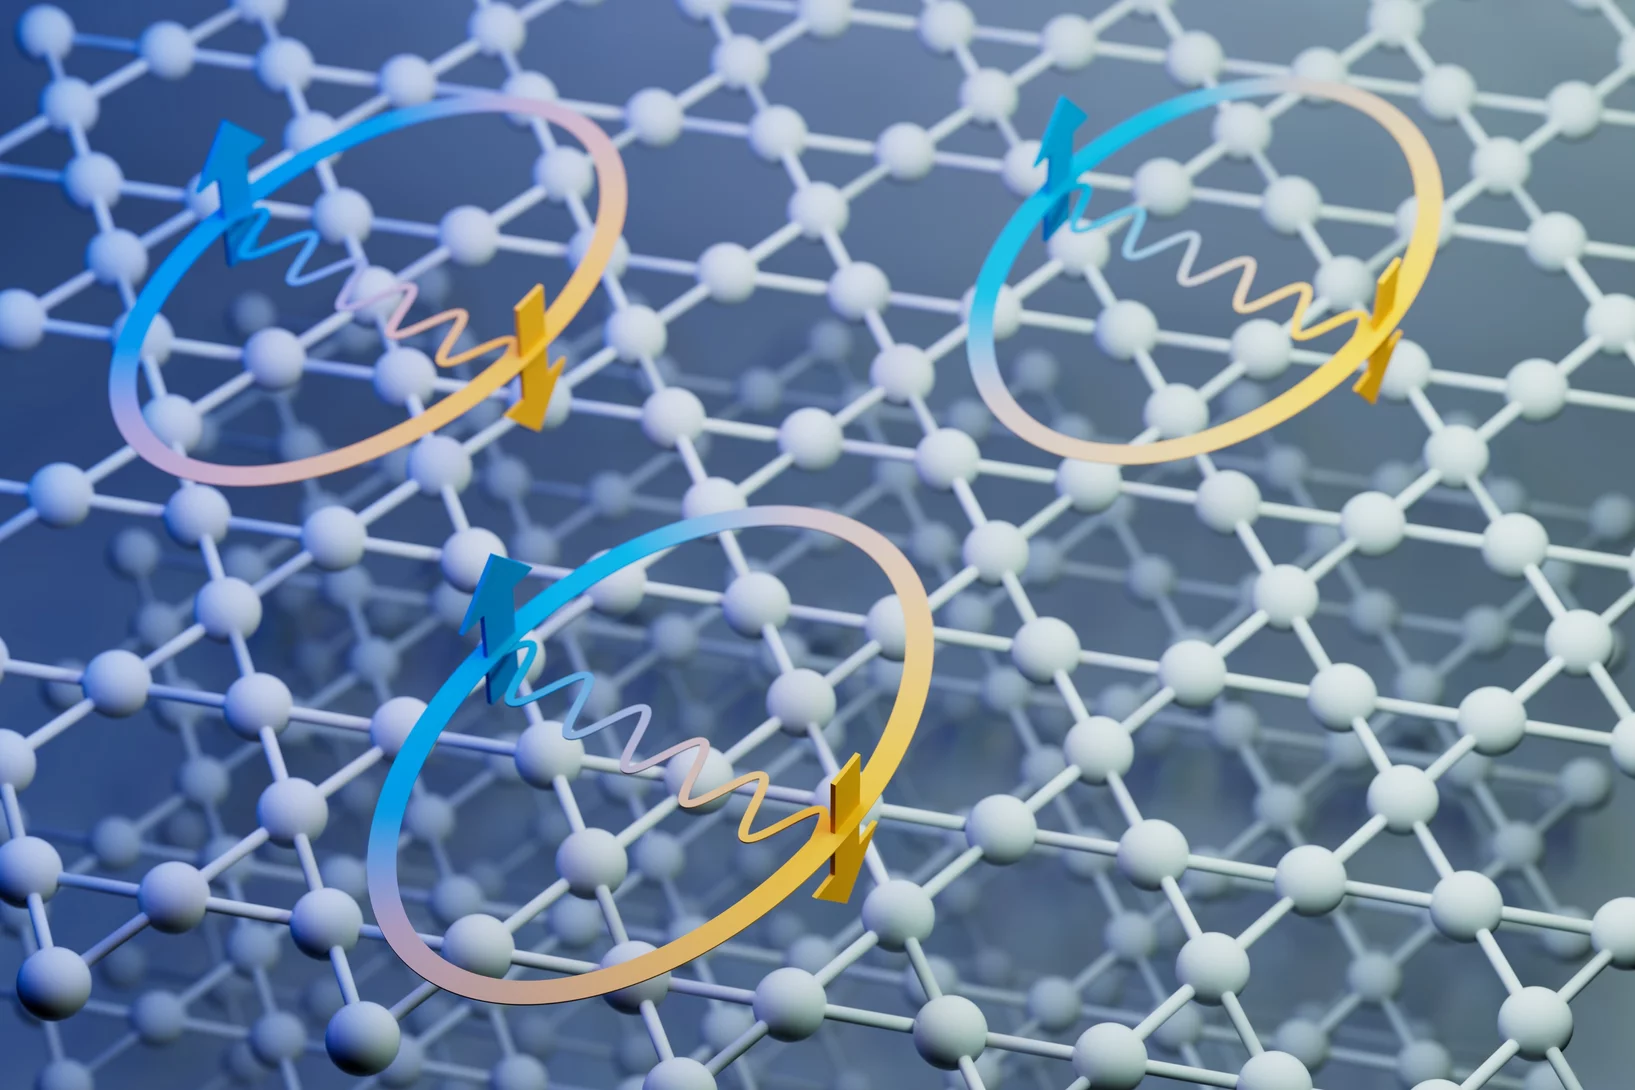 Researchers revealed how electrons pair up within the kagome lattice in an unusual conformation, giving rise to unconventional superconductivity (Image: Paul Scherrer Institute/ Mahir Dzambegovic) 